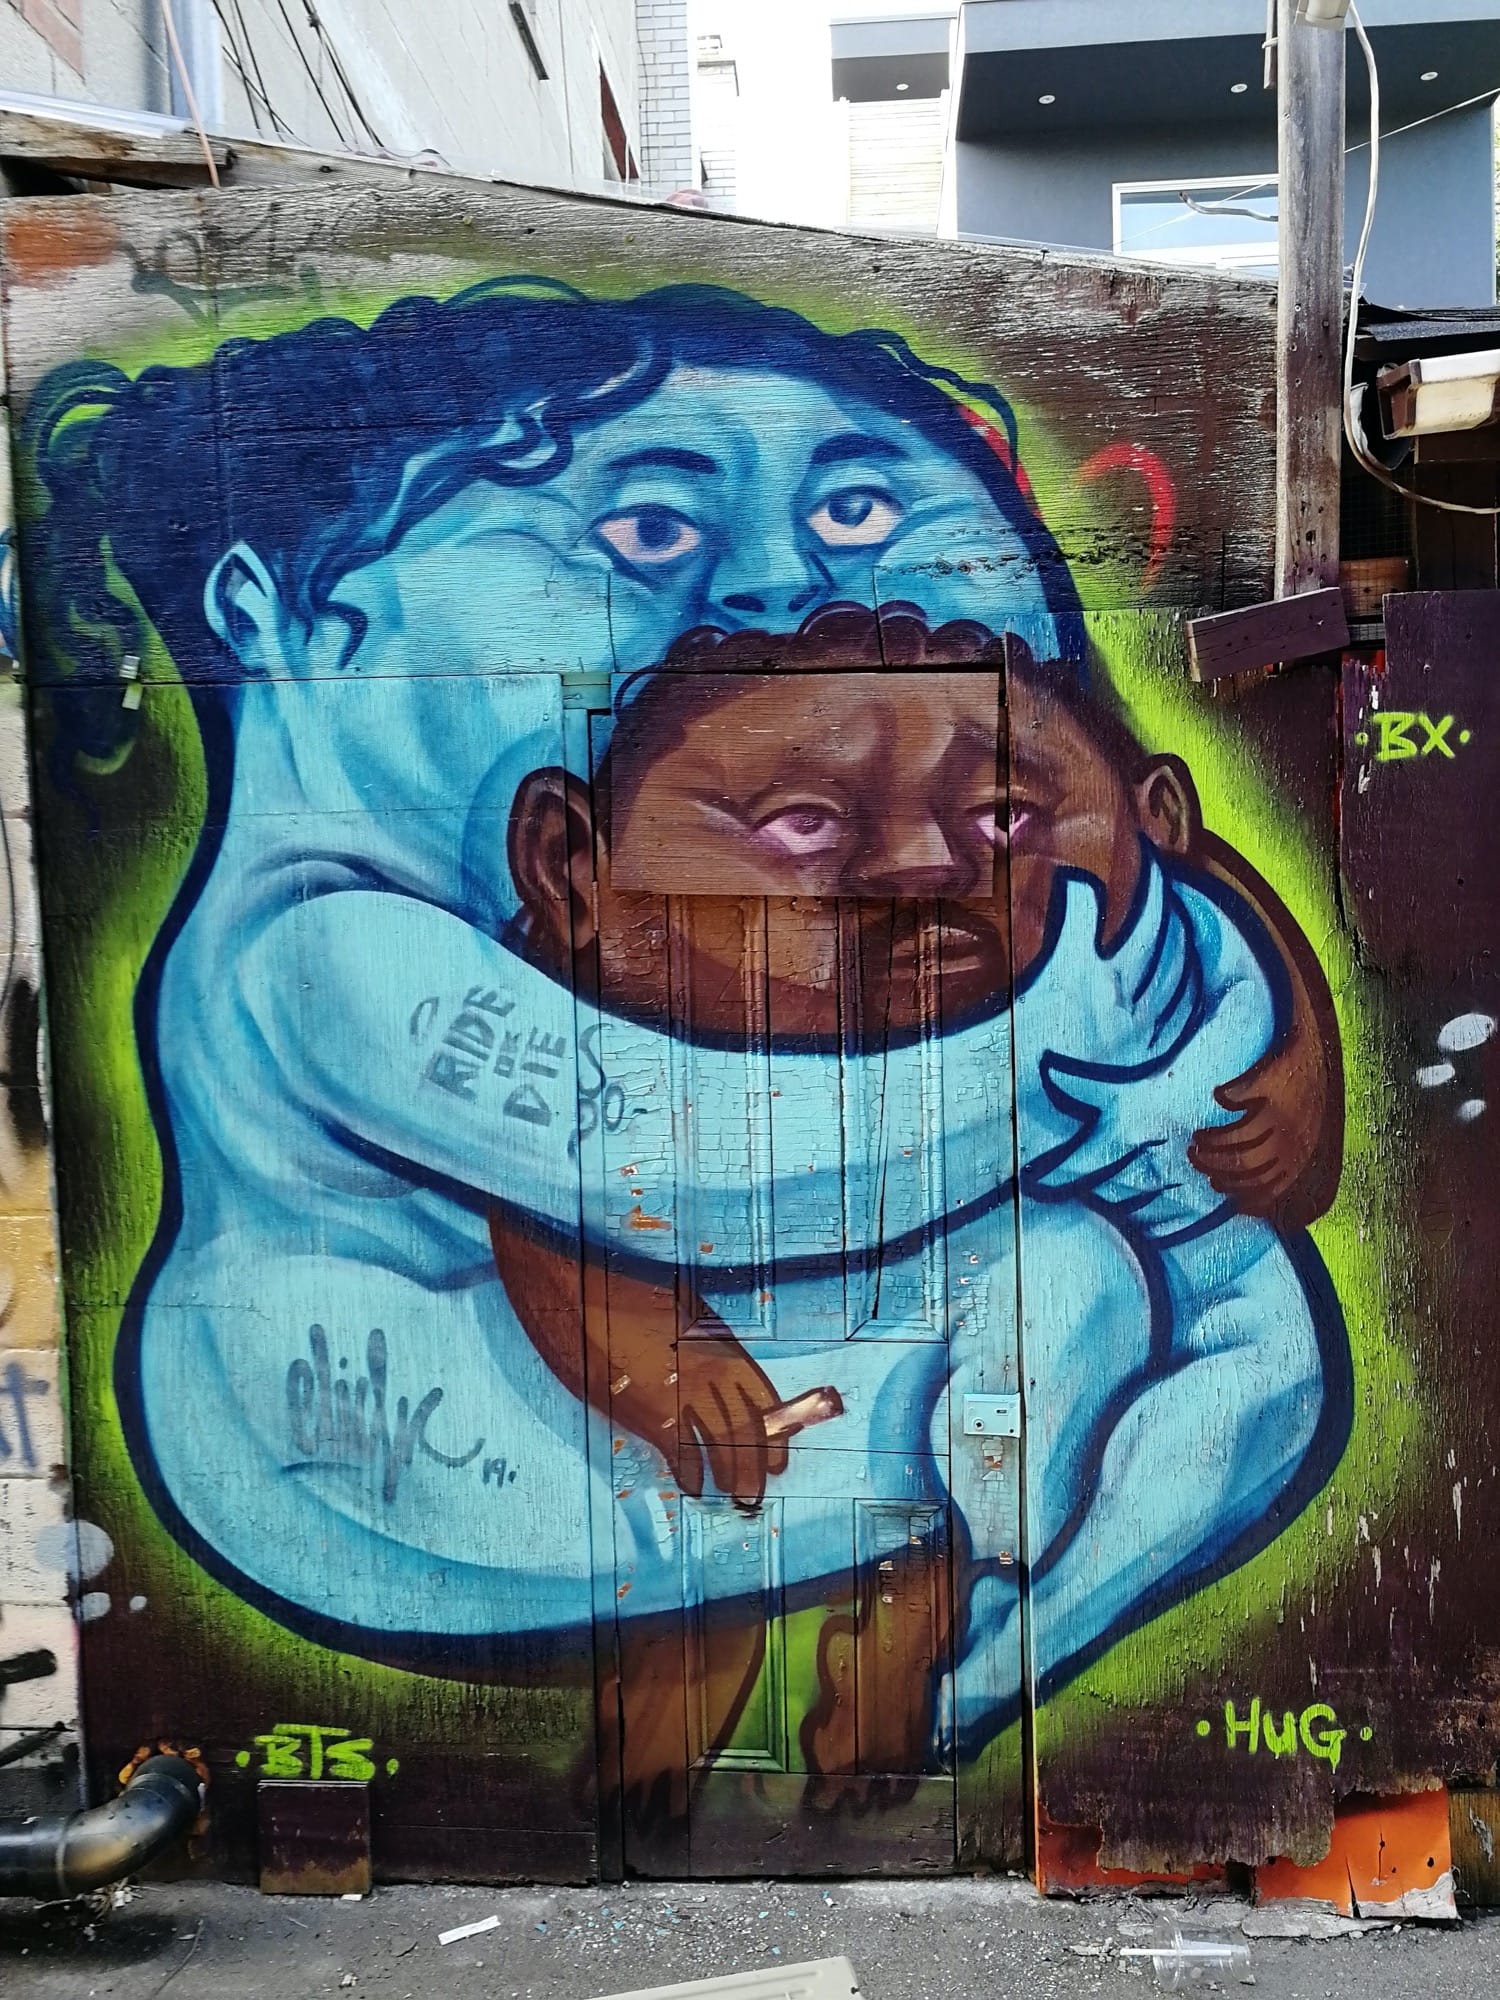 Graffiti 2446  captured by Rabot in Toronto Canada